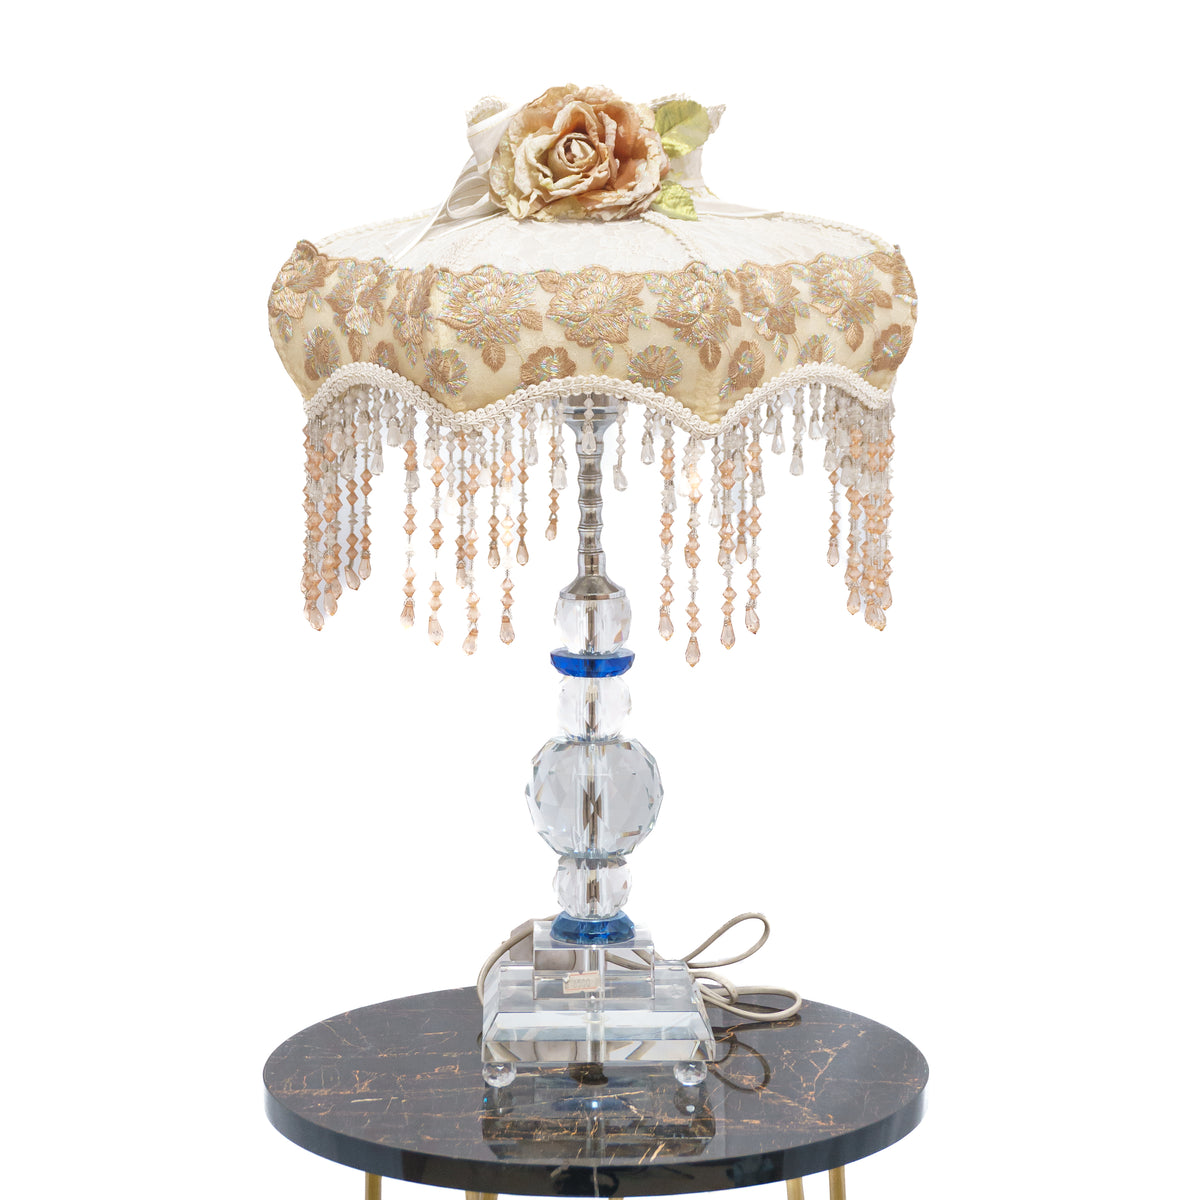 Electric Table Lamp: Rose Crown Lamp Shade with A String of Pearls and Crystal Base Featuring Crystal Ball Stand